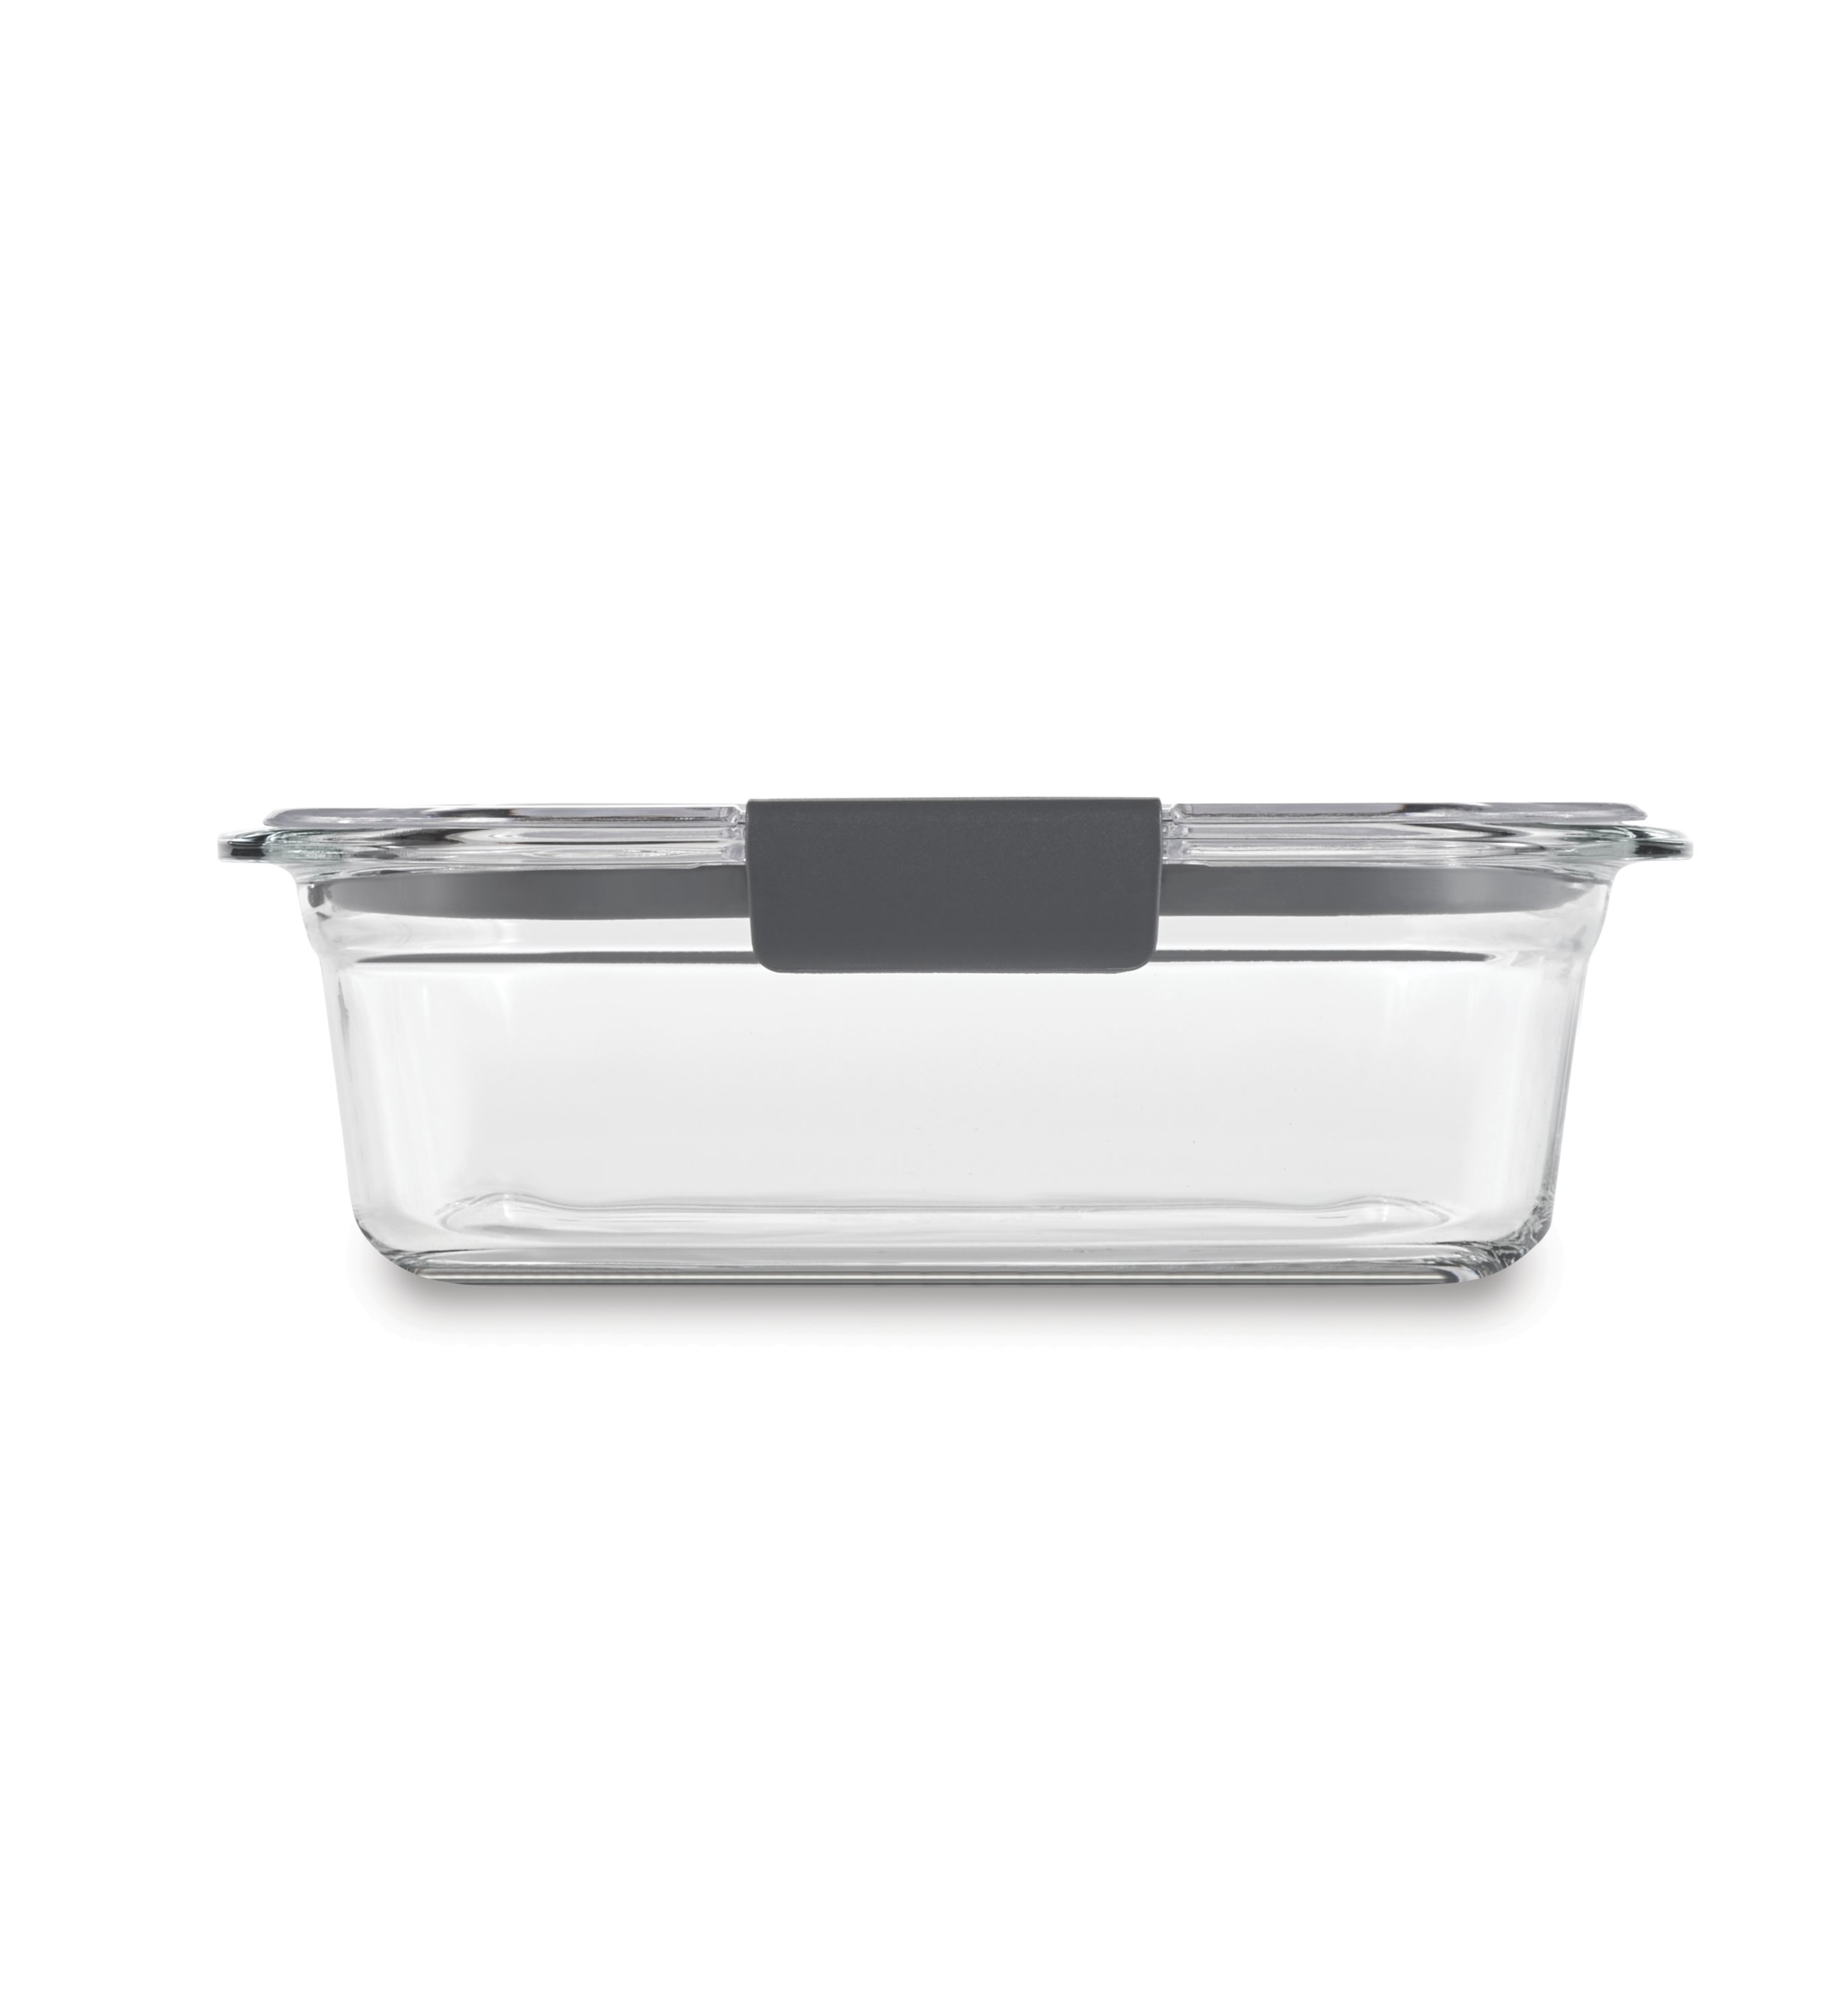 https://s7d9.scene7.com/is/image/NewellRubbermaid/2118320-rubbermaid-food-storage-brilliance-glass-clear-3.2c-straight-on